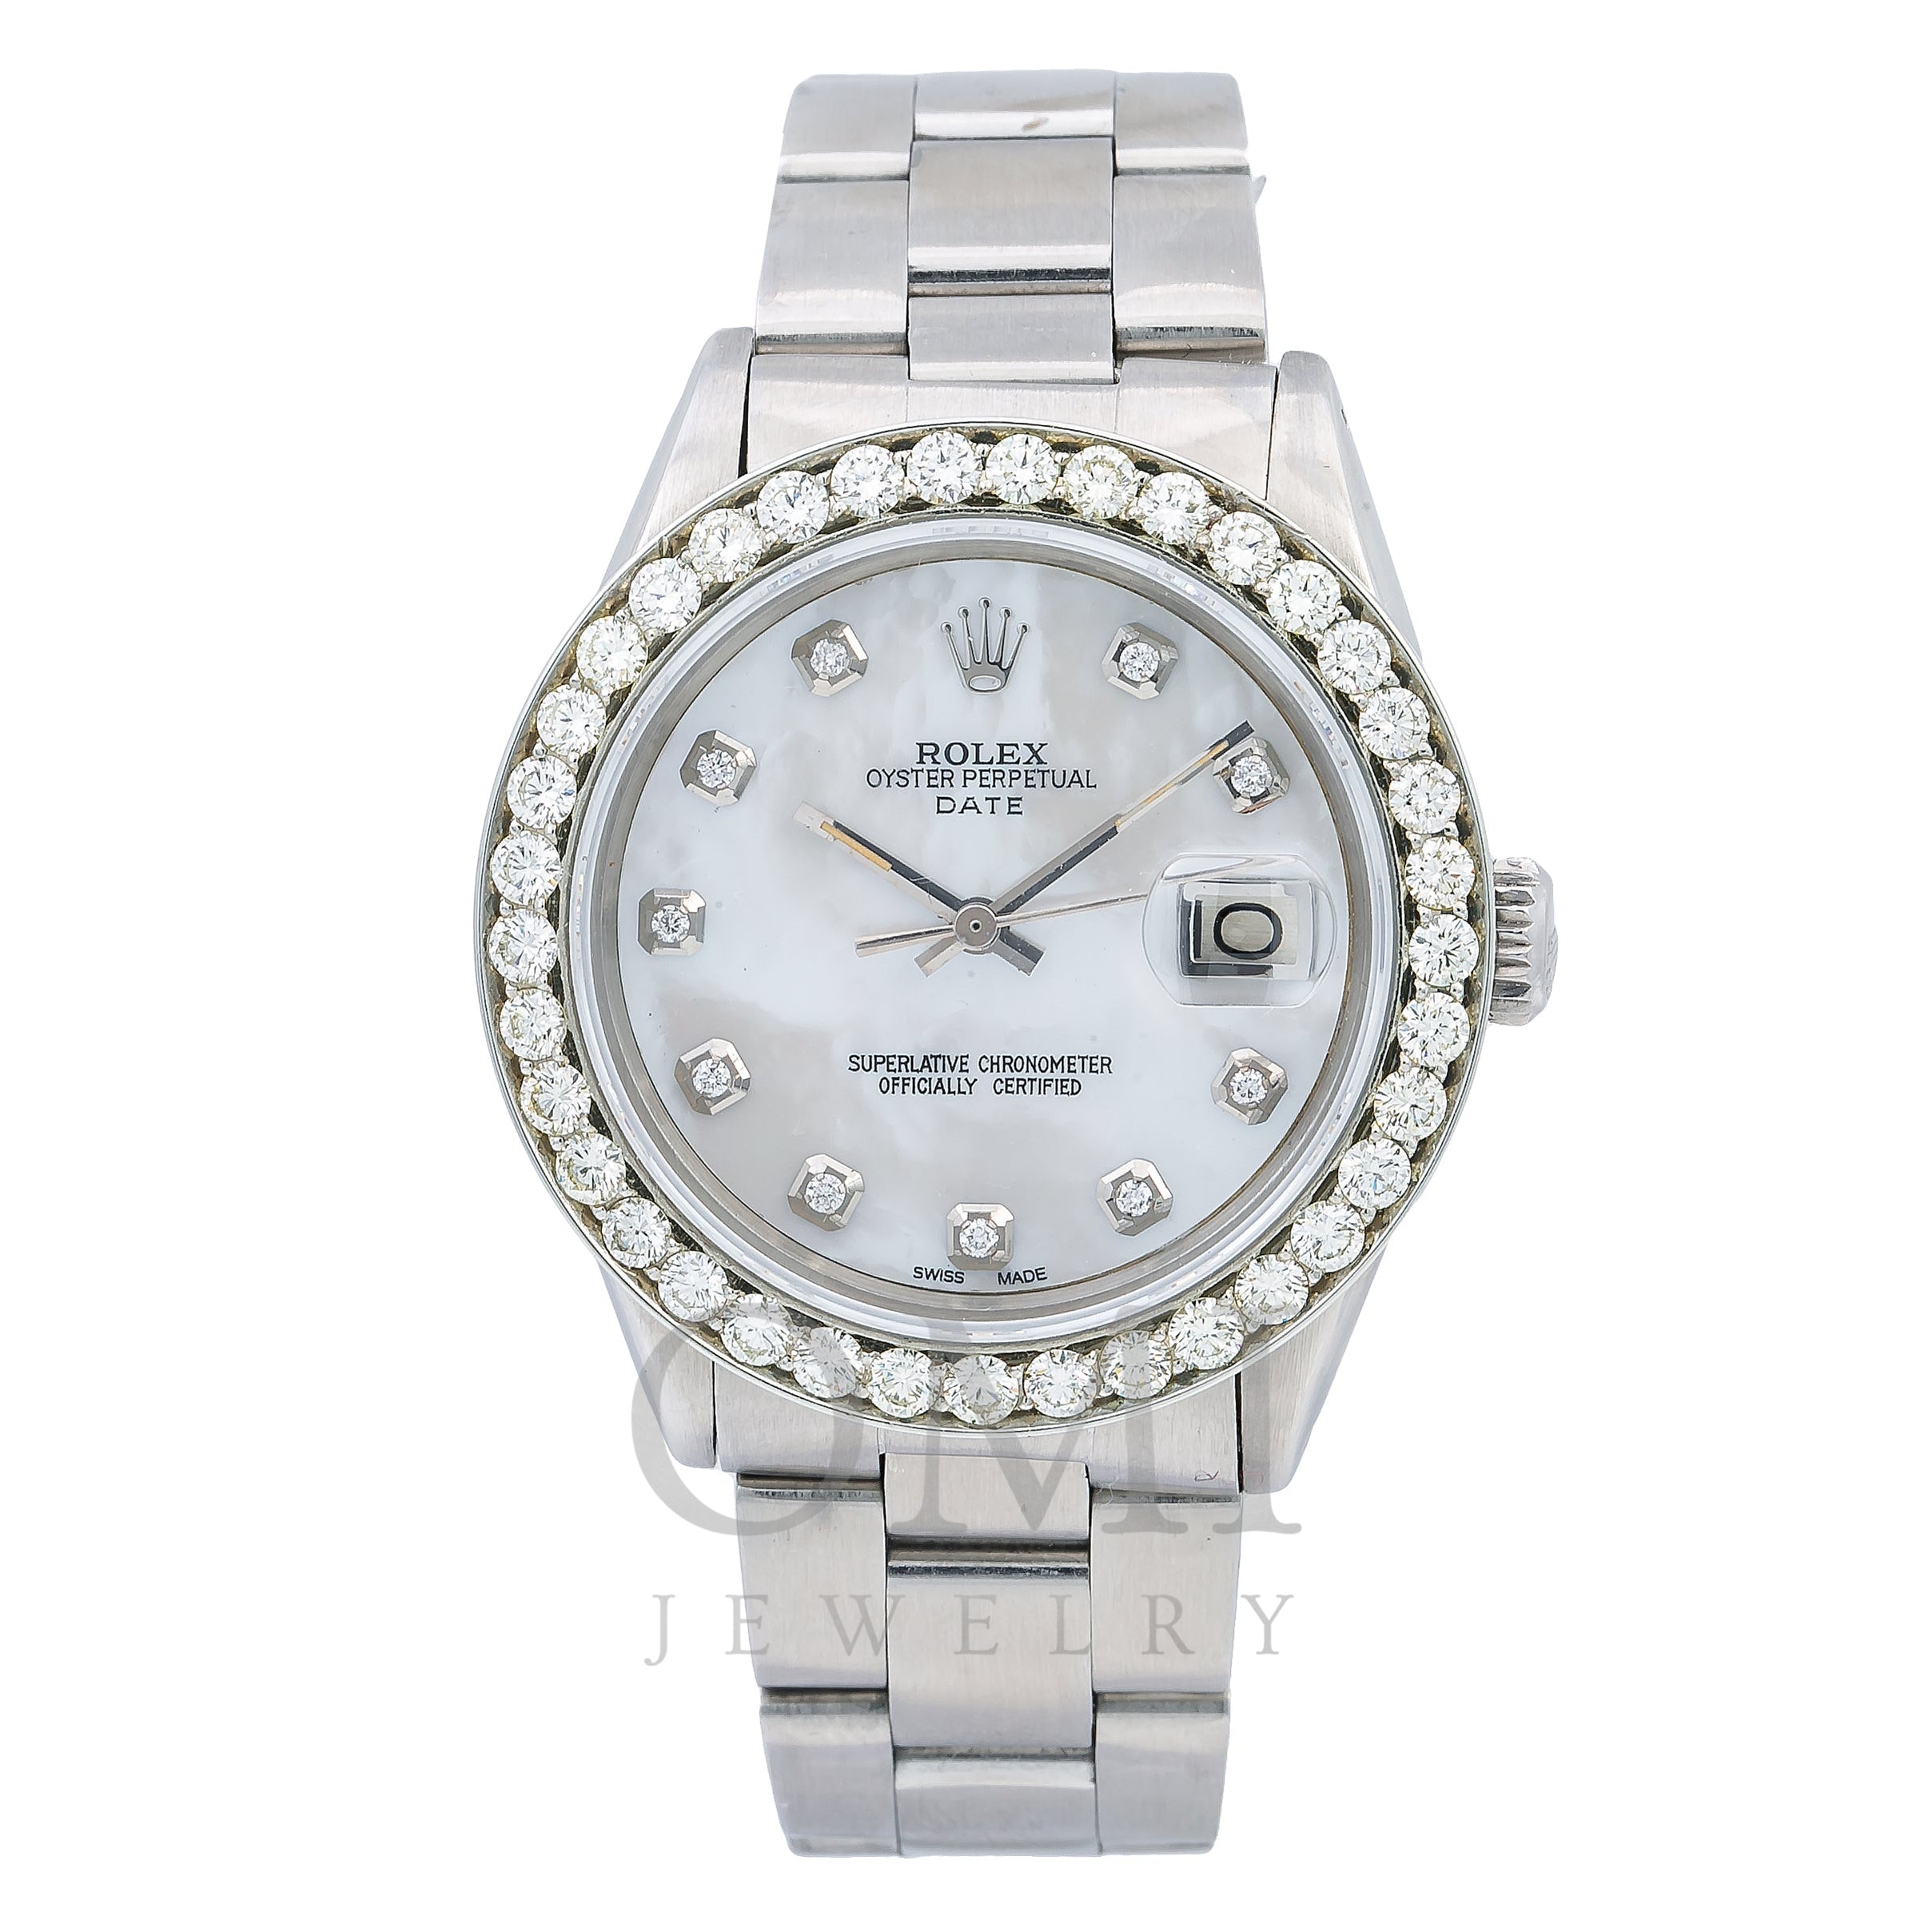 Rolex Oyster Perpetual Diamond Watch, Date 1500 34mm, Mother of Pearl Dial with 1.20 ct Diamonds